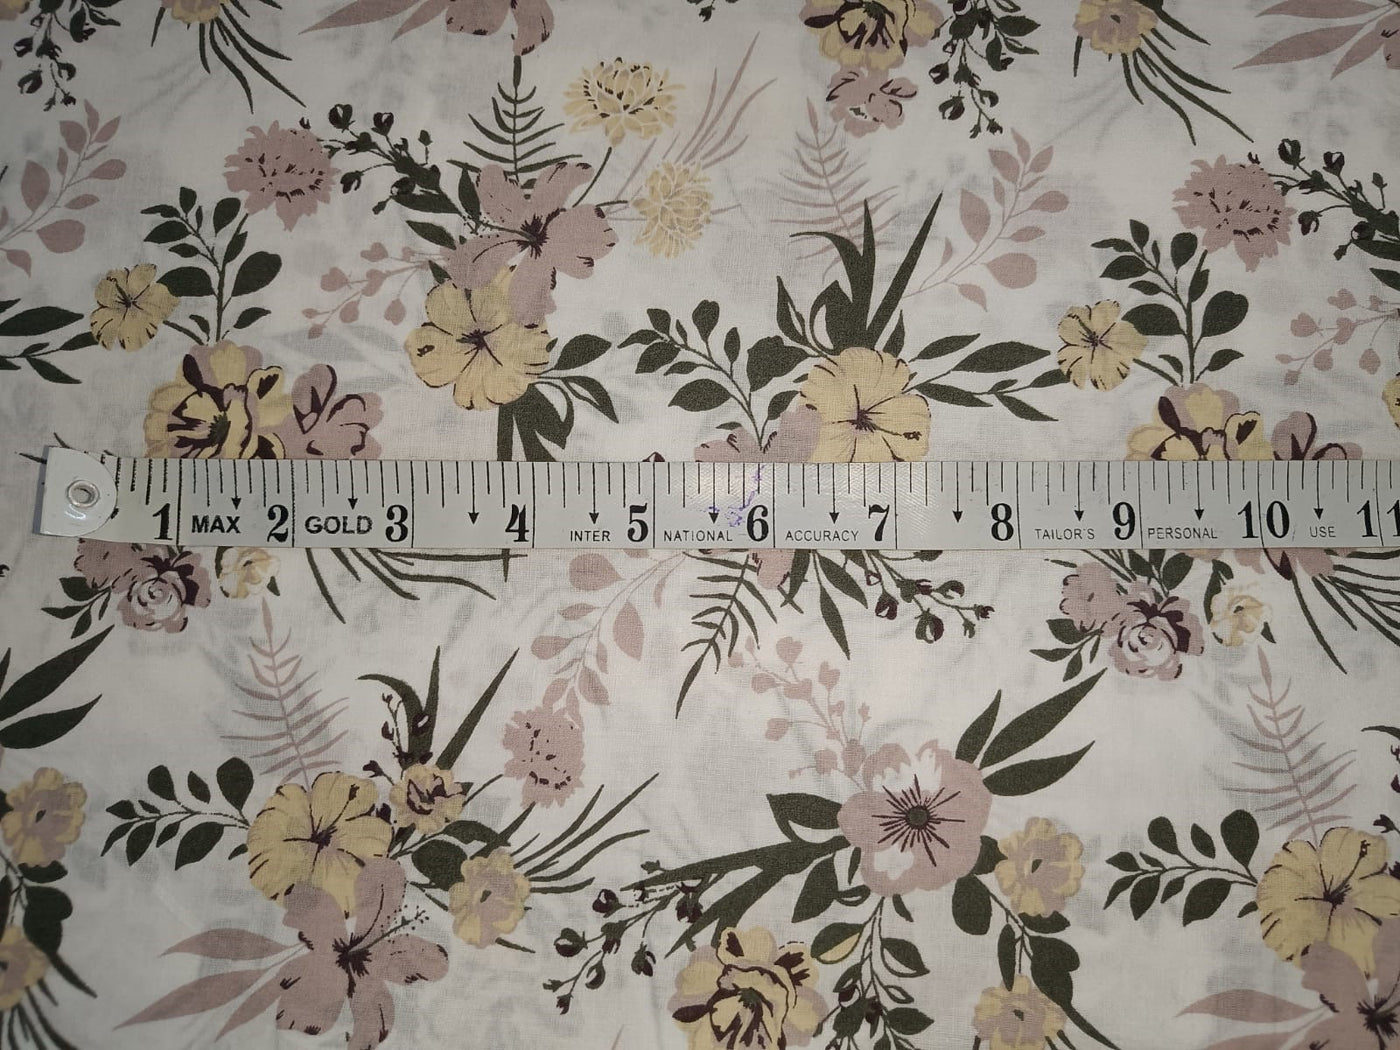 100% Pure Cotton lawn pastel floral  printed fabric  58" wide